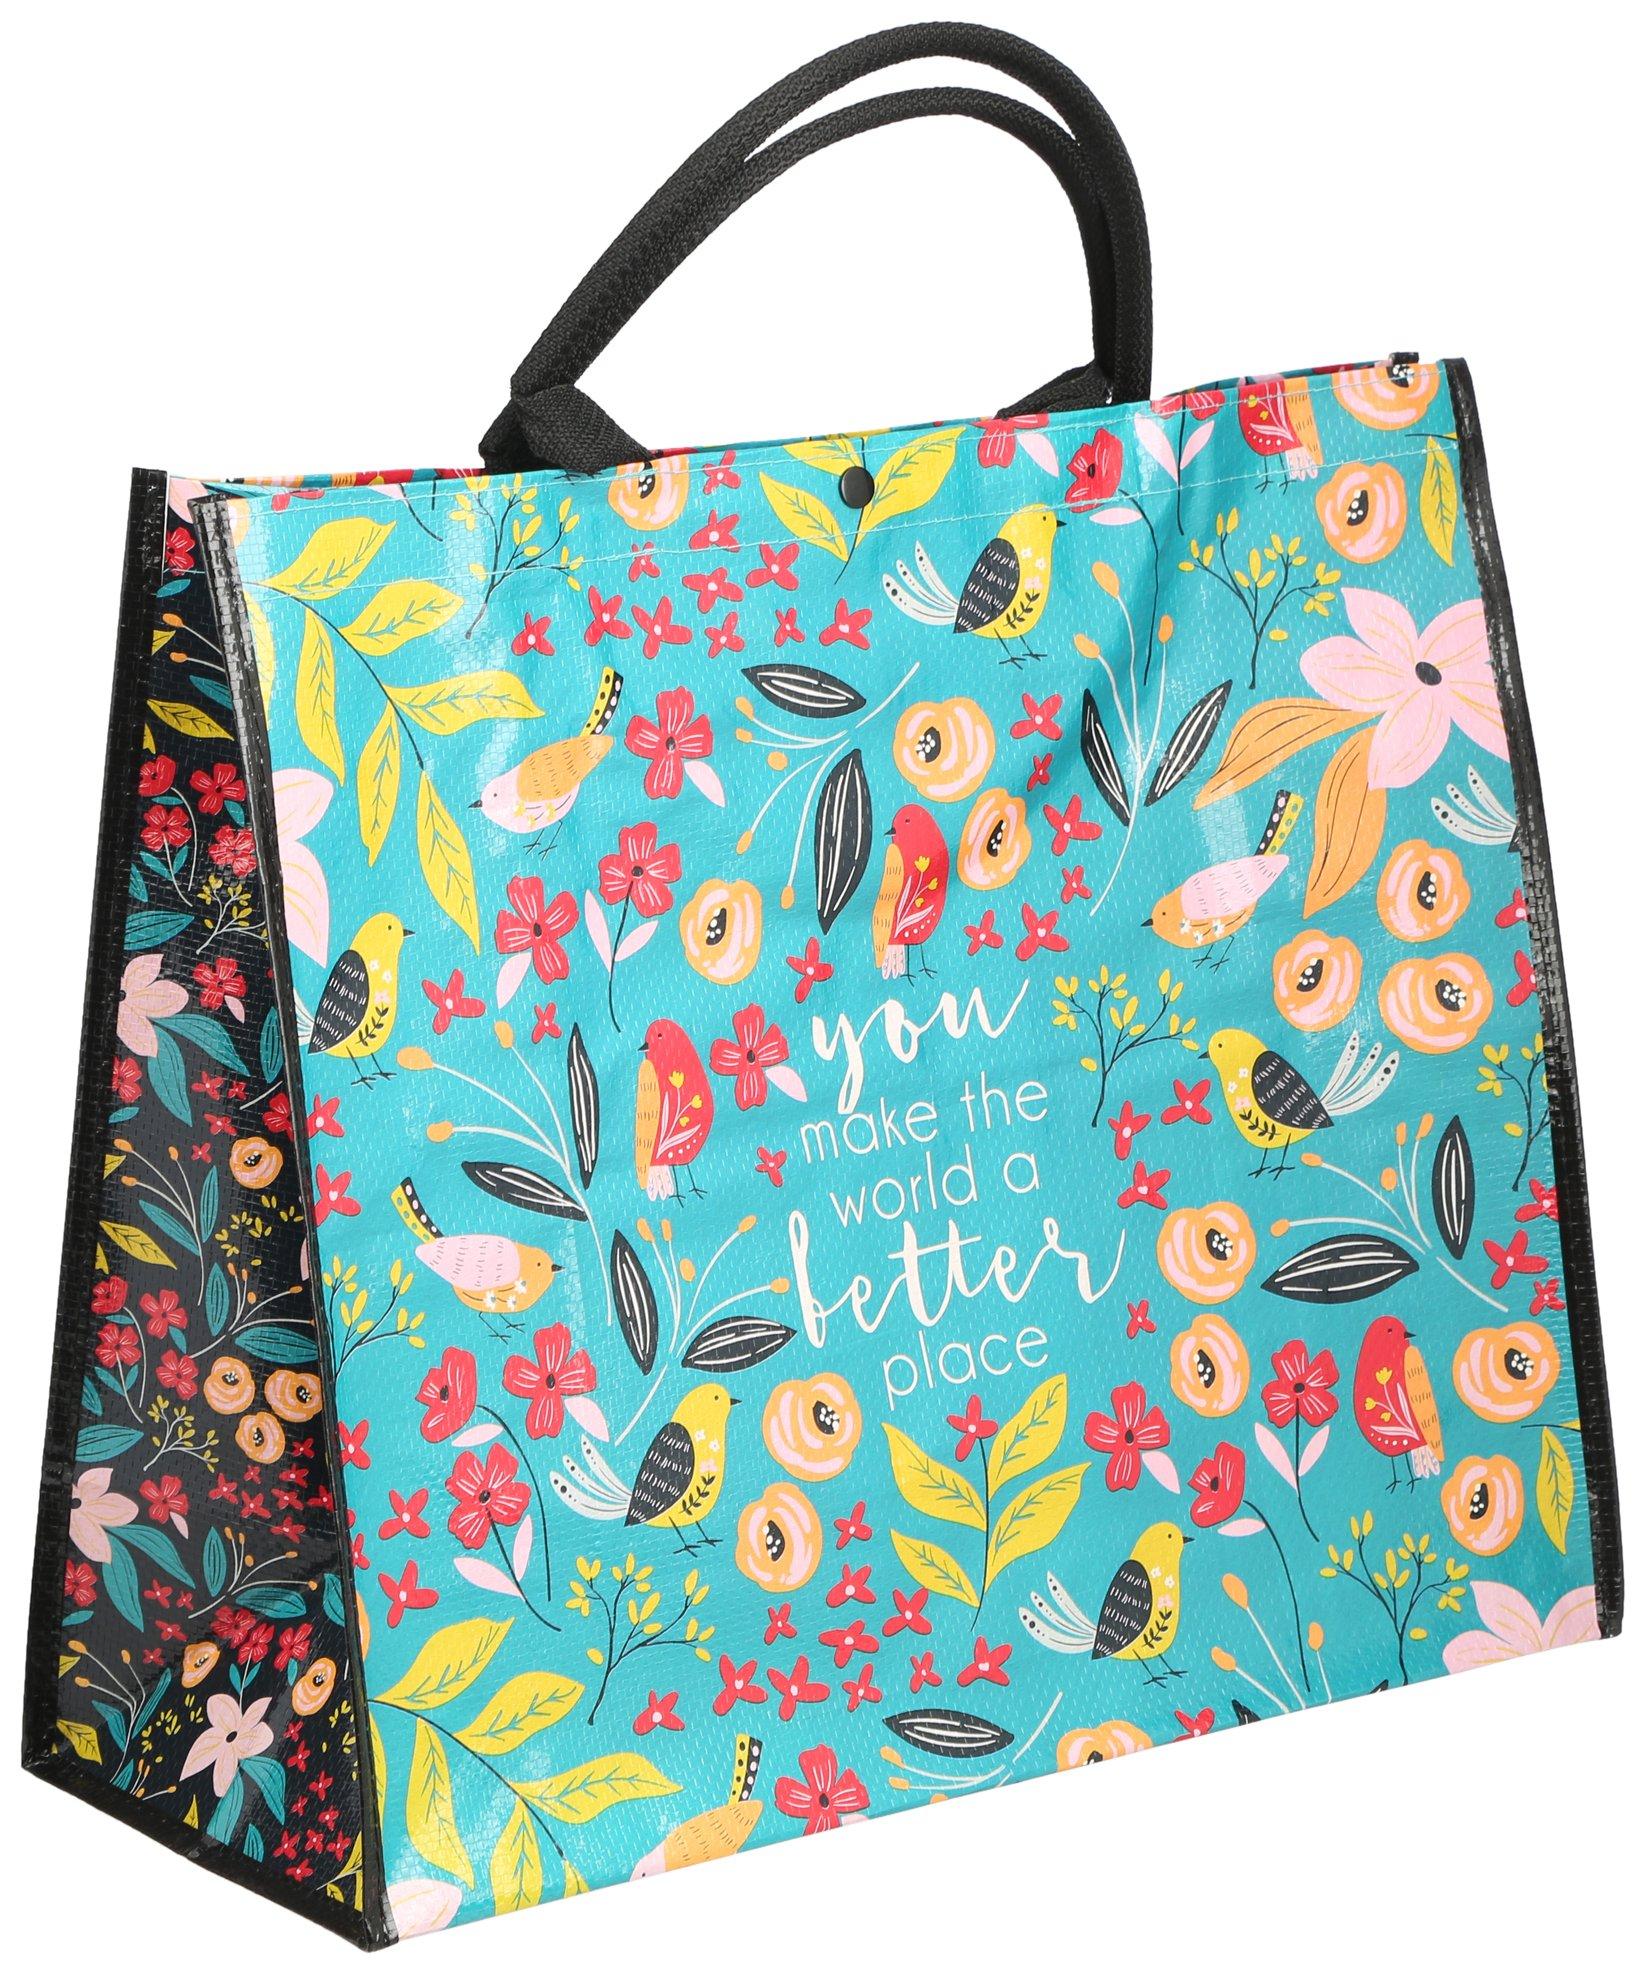 Better Place Flower Print Reusable Tote